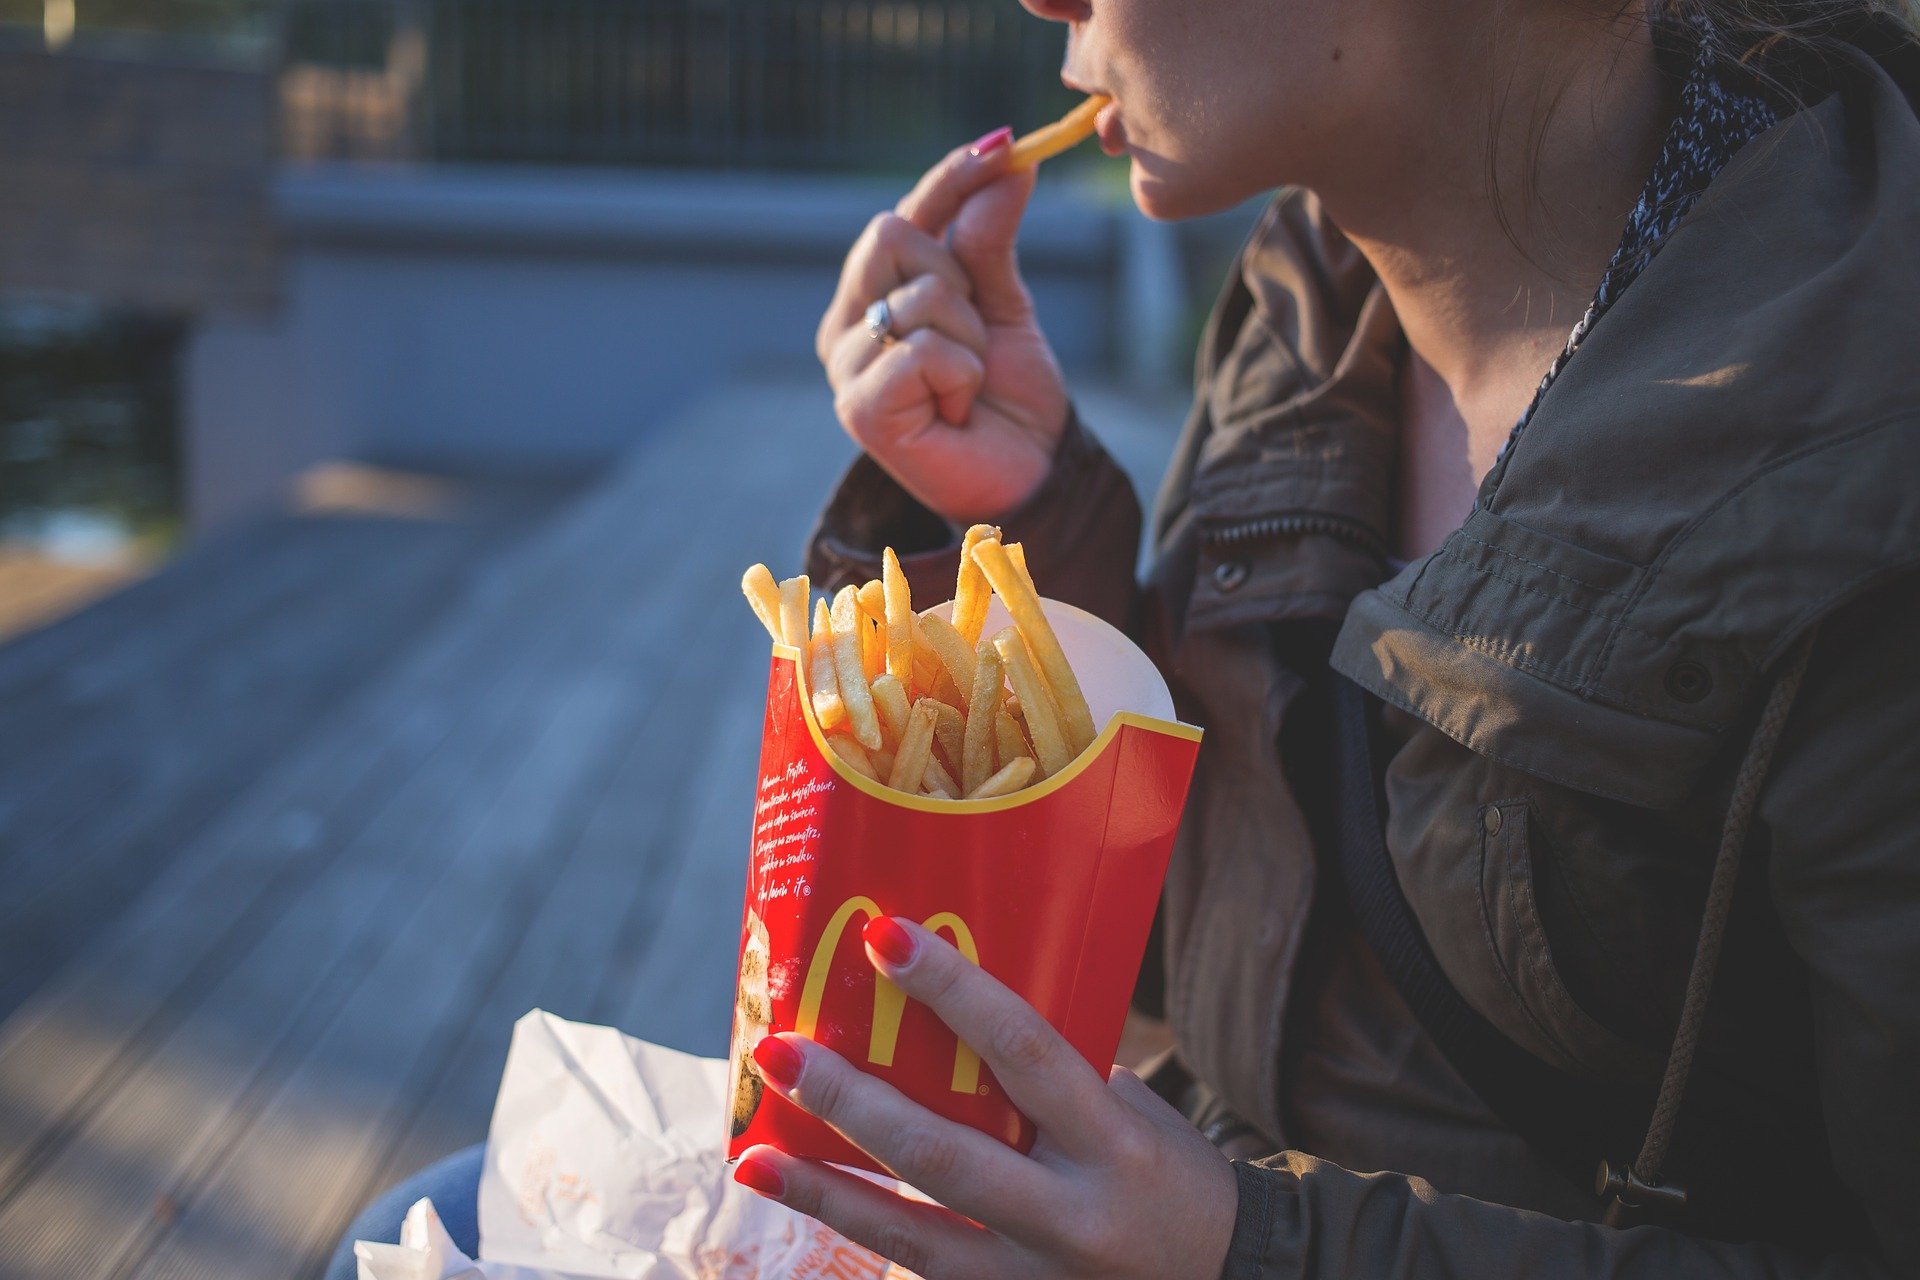 A woman eating a large box of McDonald's French fries | Photo: Pixabay/Pexels